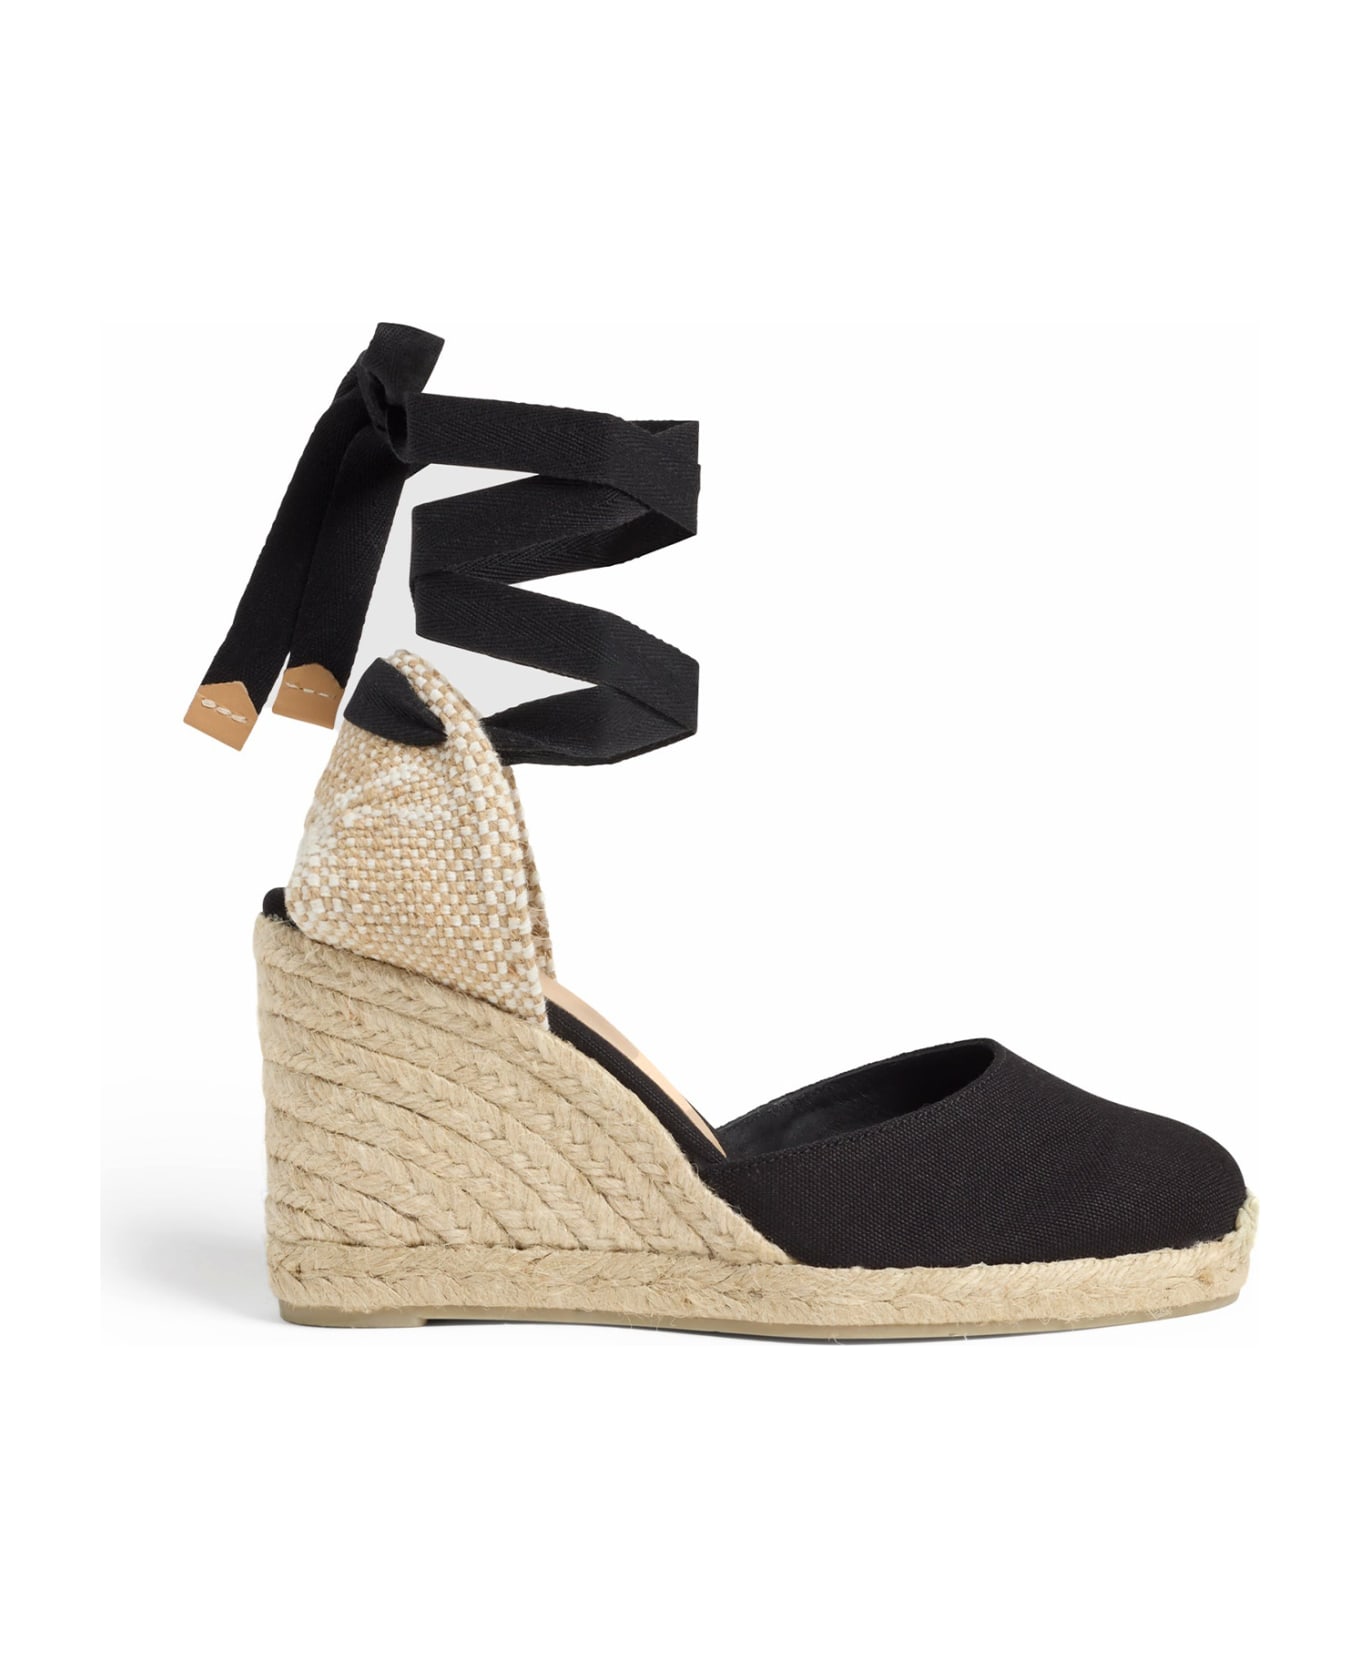 Castañer Espadrilles Carina Black With Laces At The Ankle - Negro